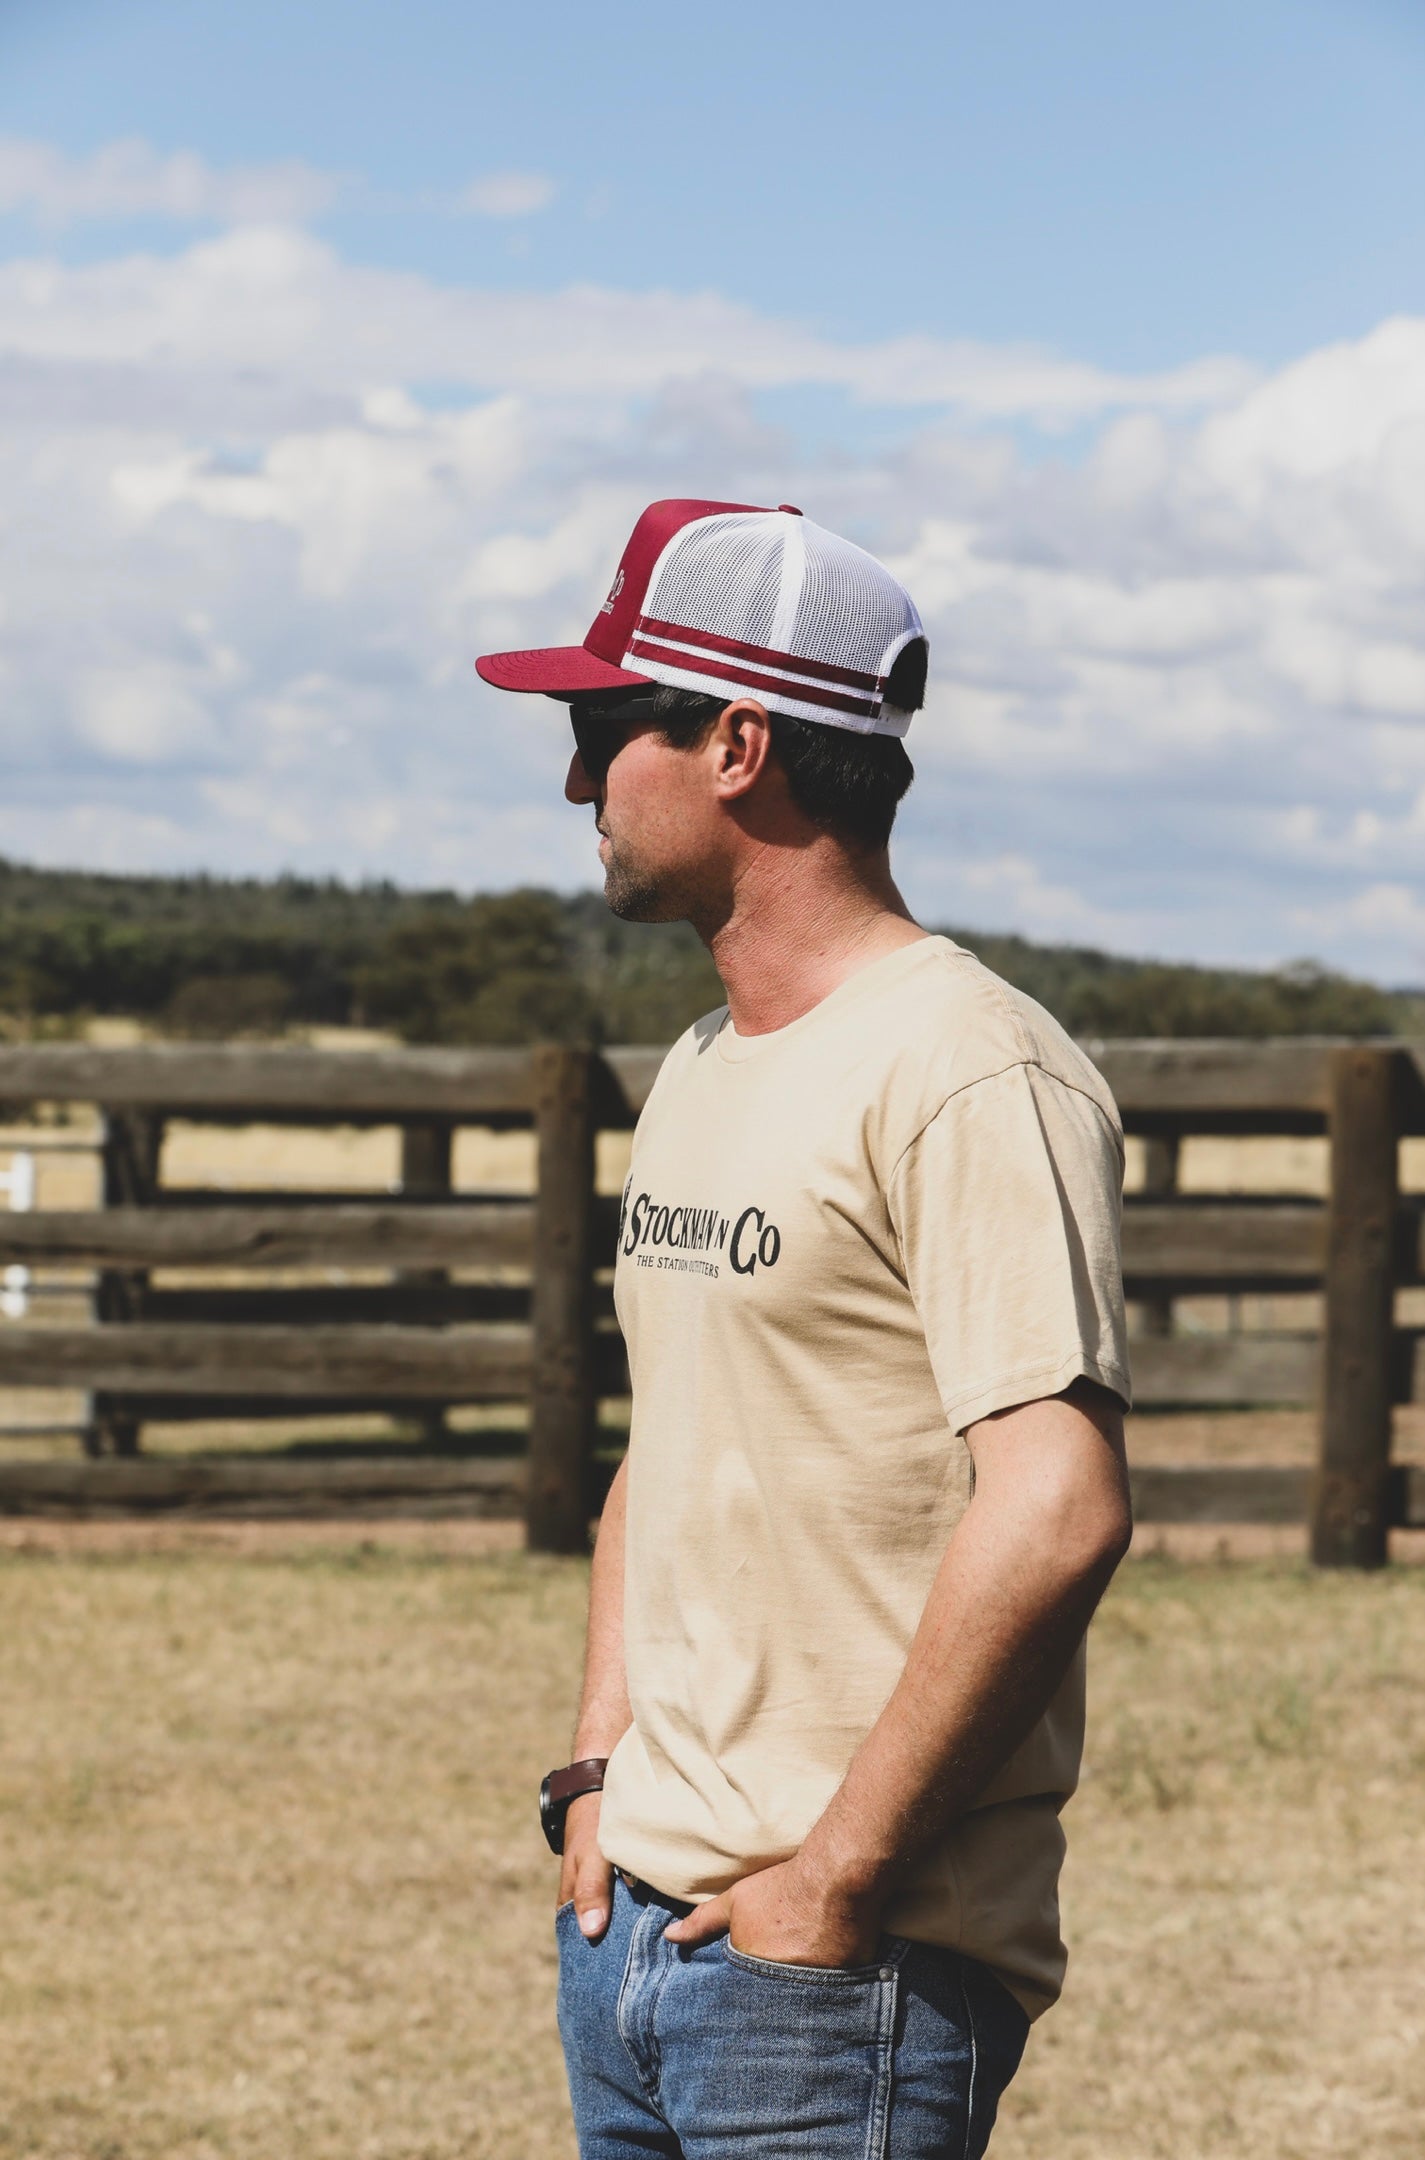 The Station Outfitters Trucker - STOCKMAN N CO